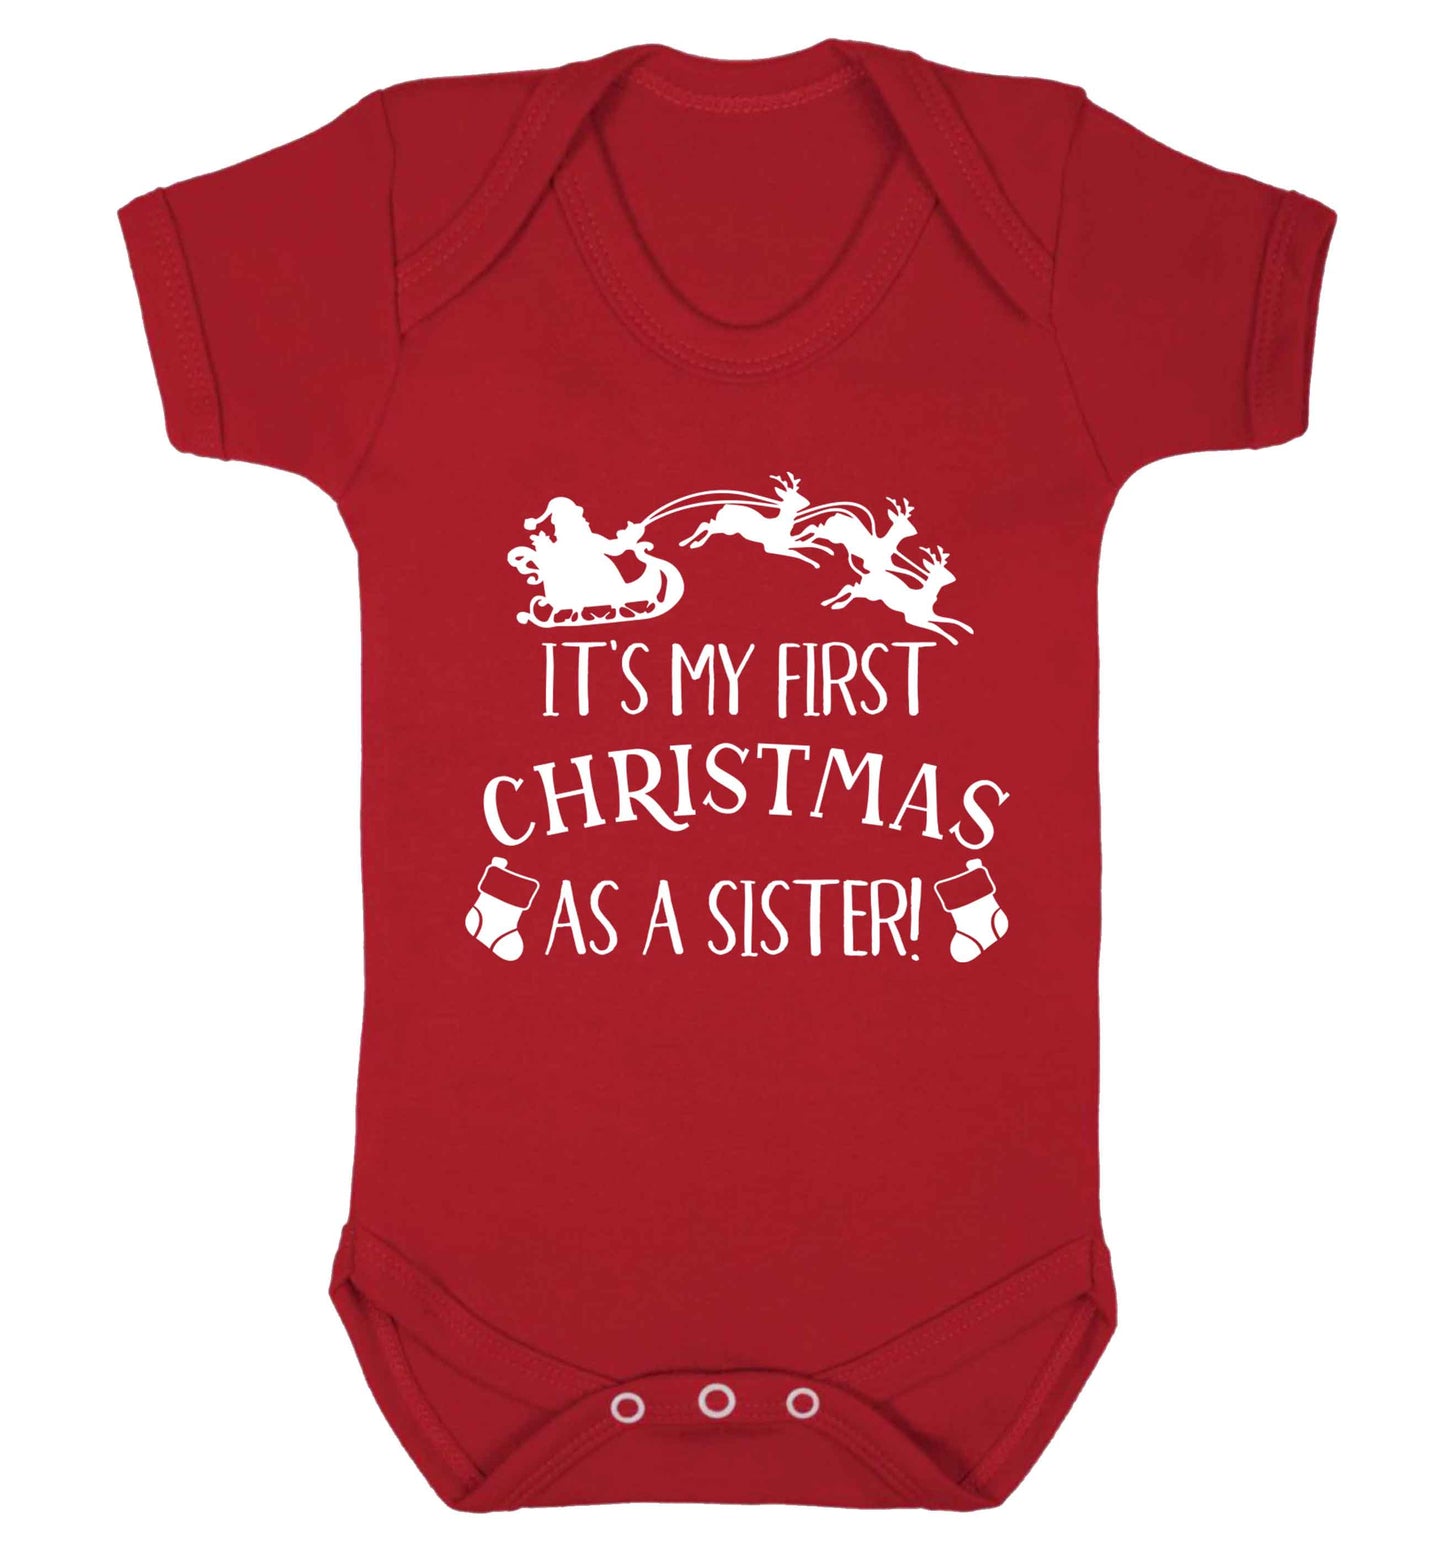 It's my first Christmas as a sister! Baby Vest red 18-24 months